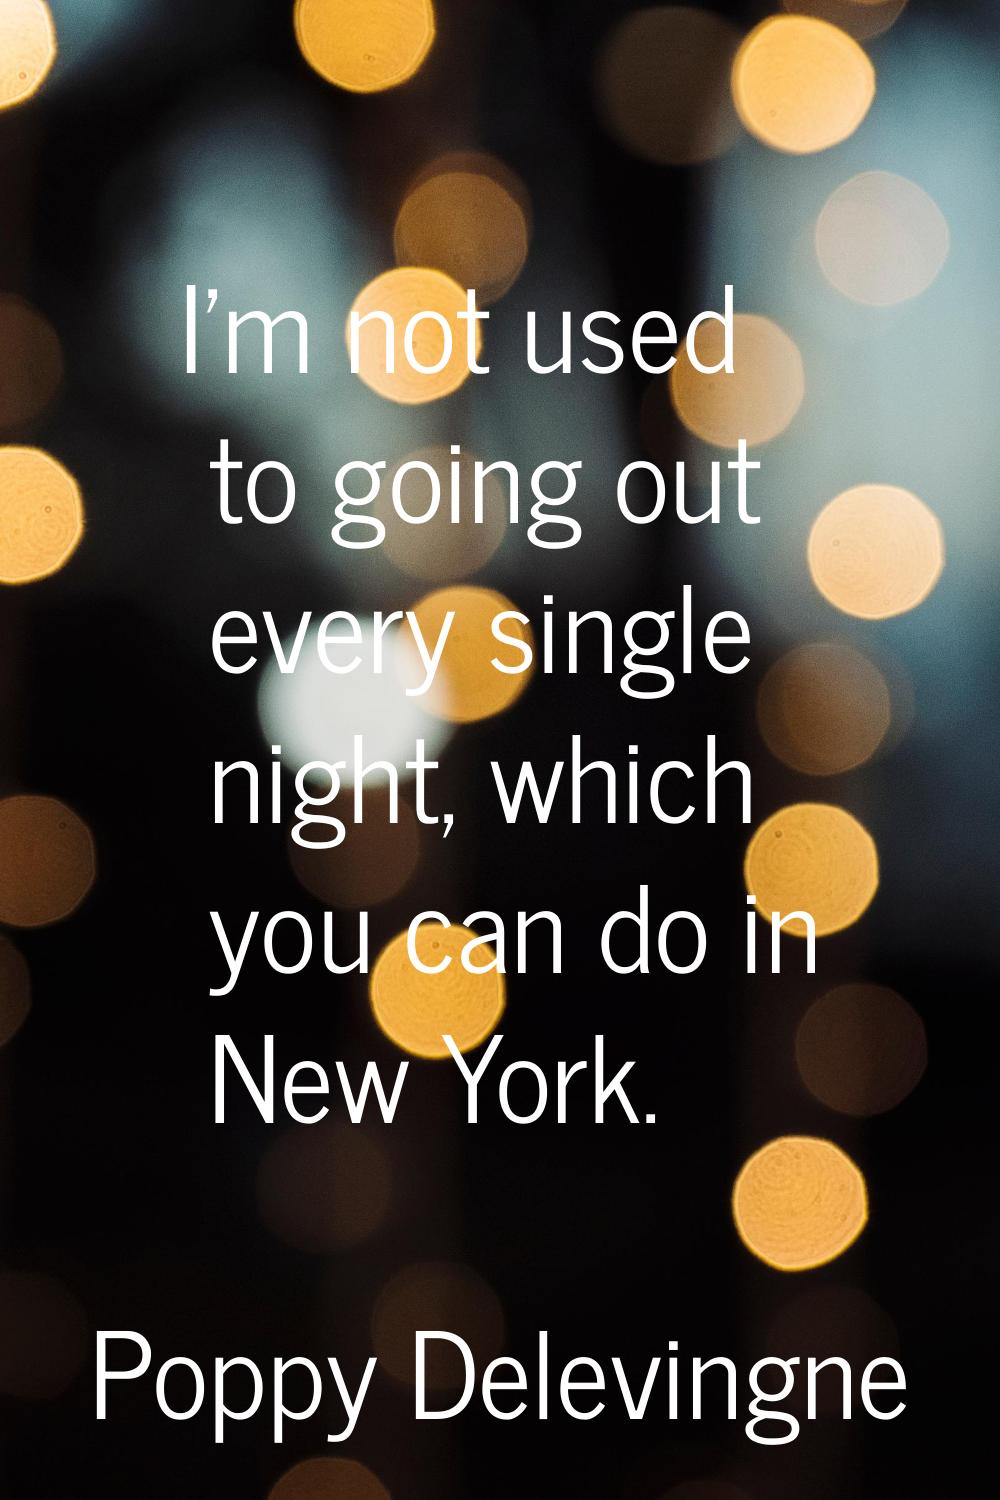 I'm not used to going out every single night, which you can do in New York.